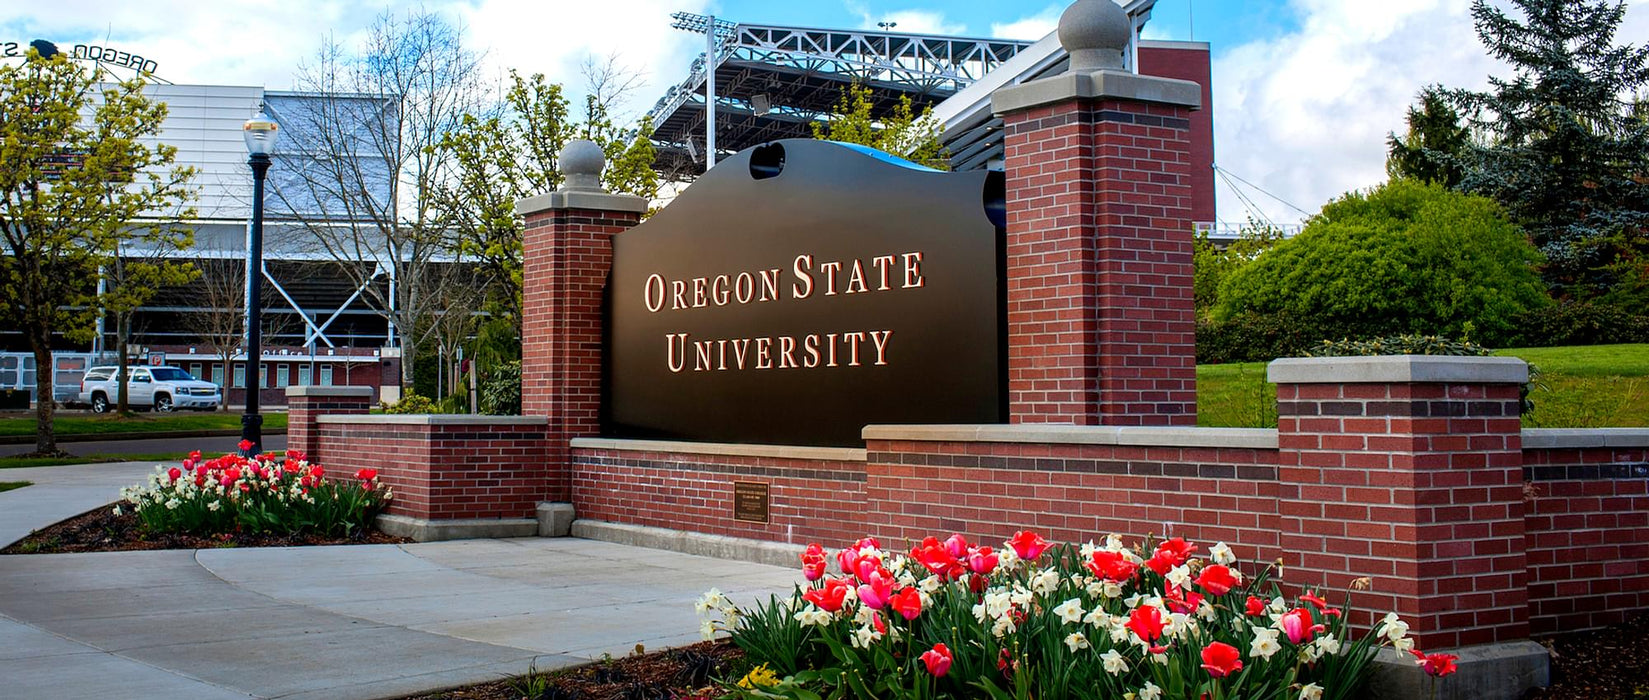 Master of Science - Toxicology at Oregon State University - Corvallis: Tuition: $29,700.00 USD/year (Scholarship Available)